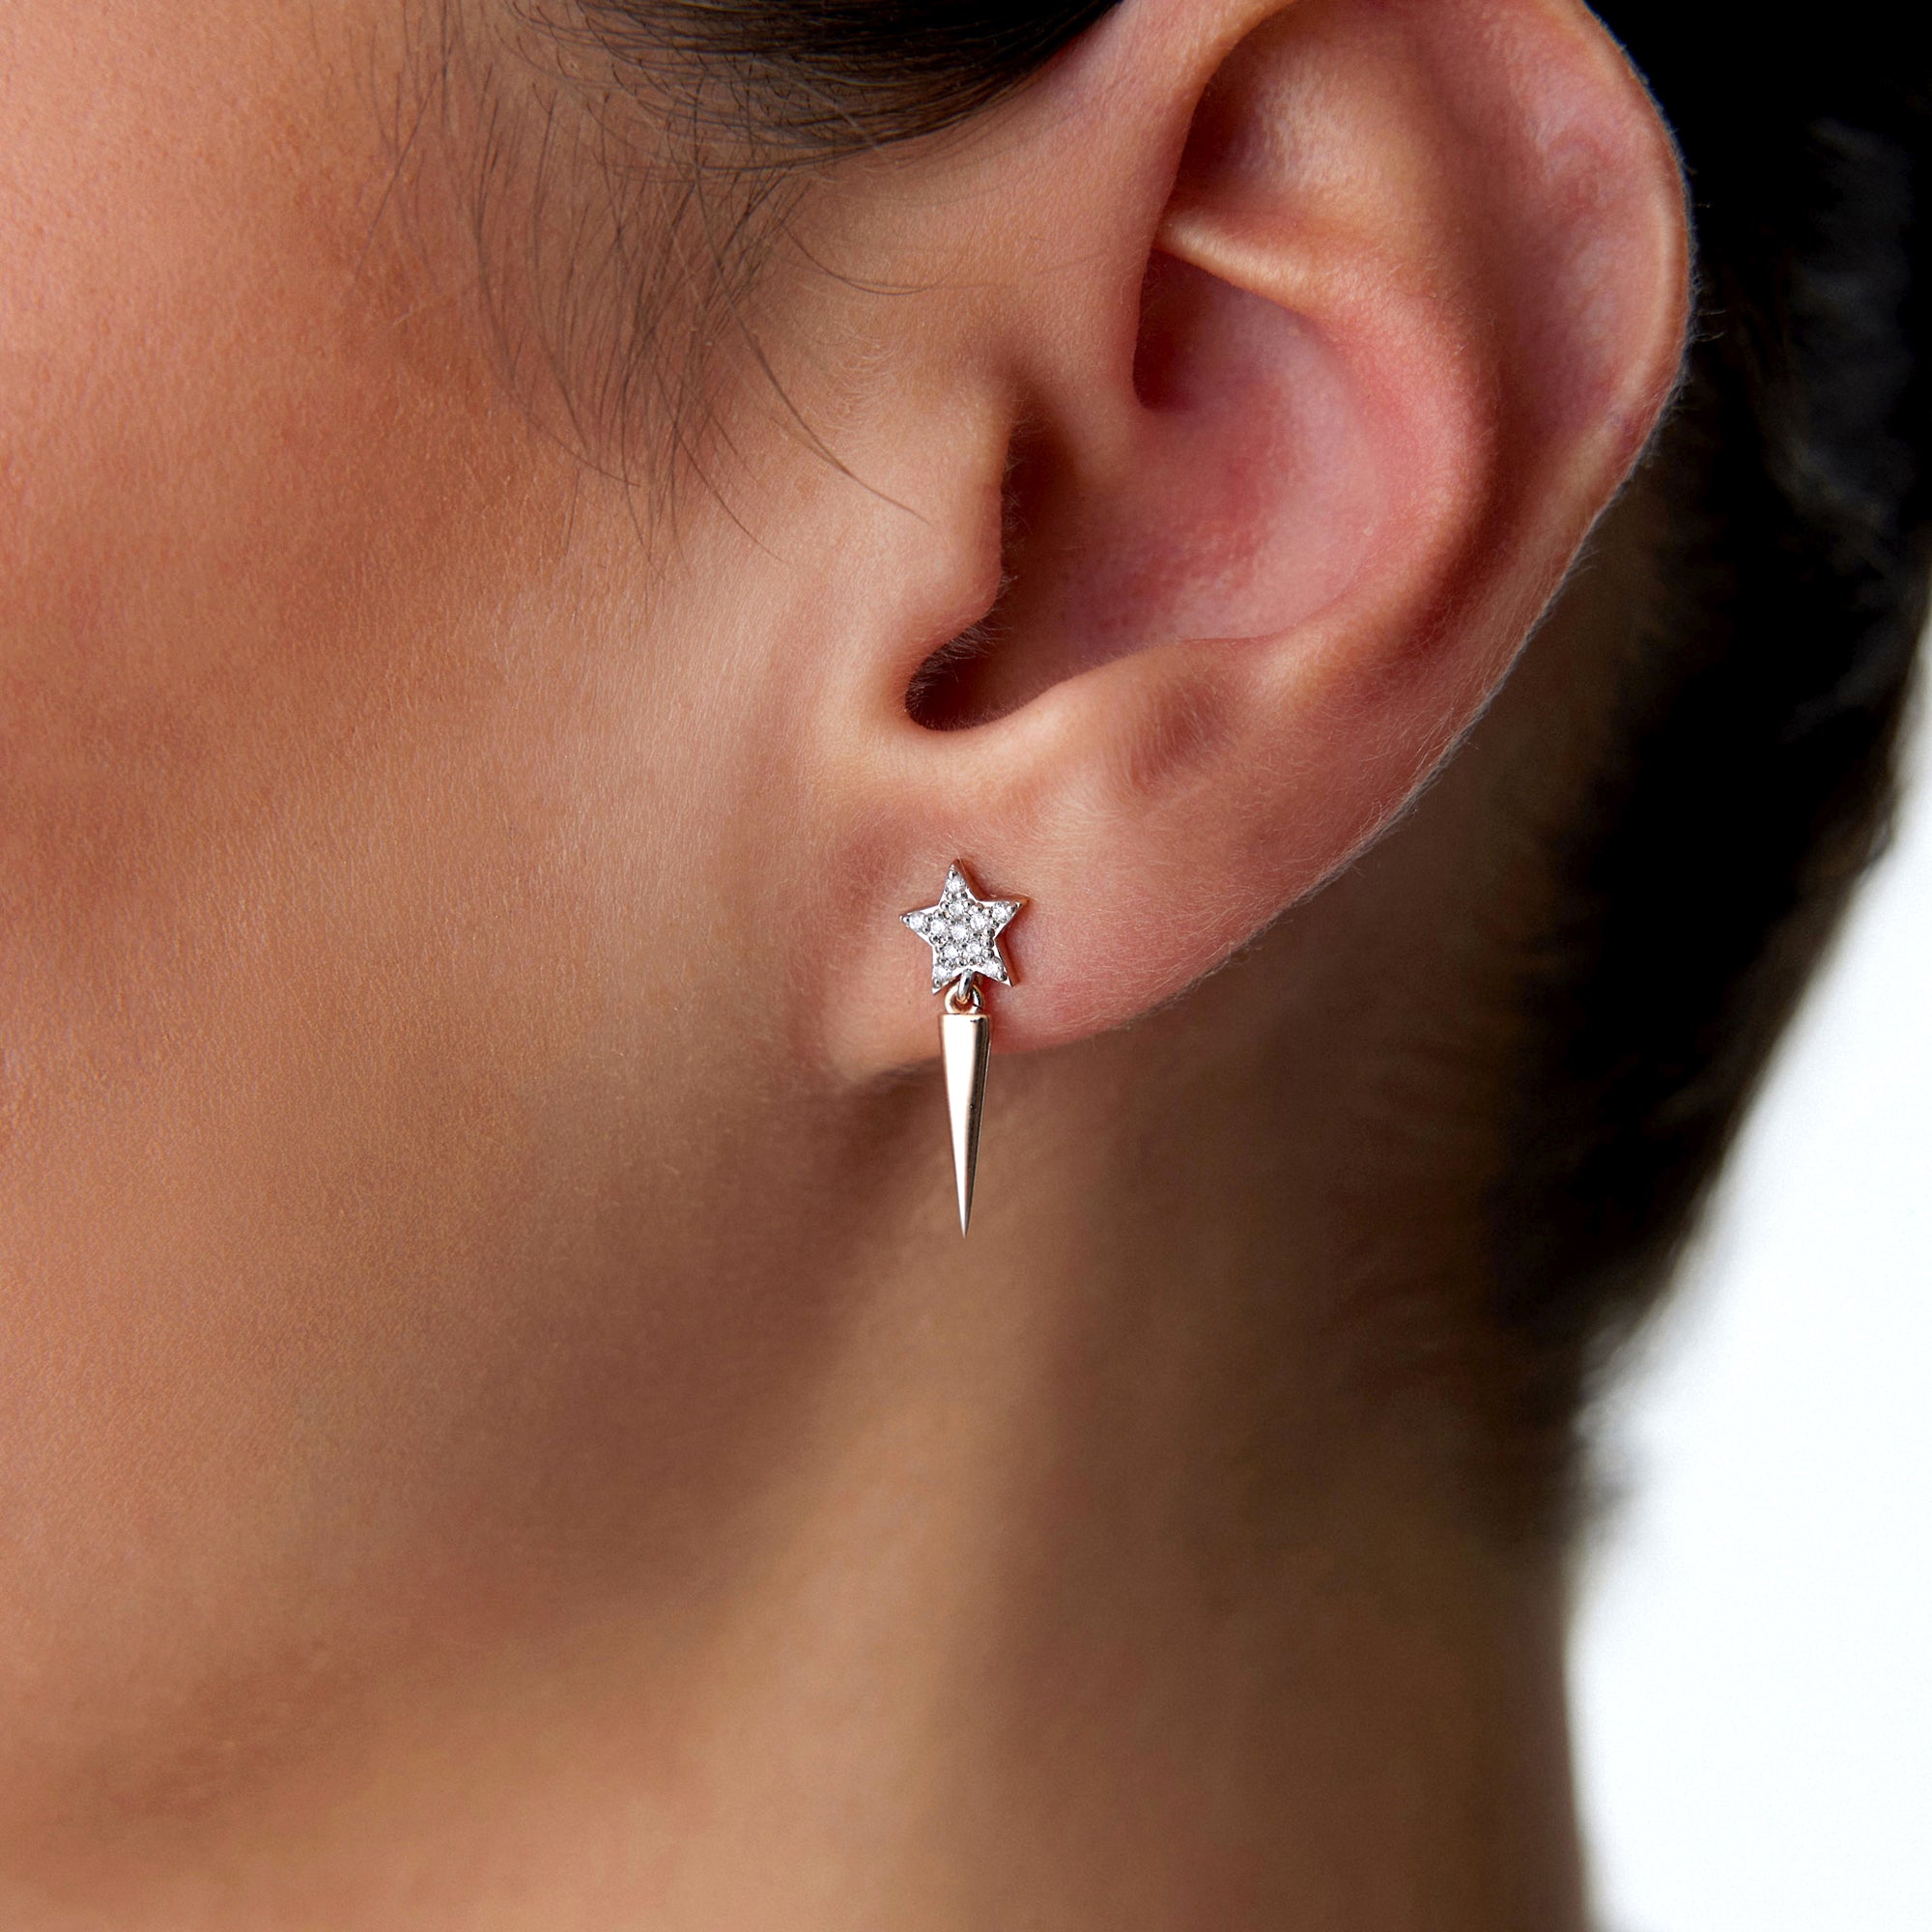 Falling Star Studs Available in 14K and 18K Gold